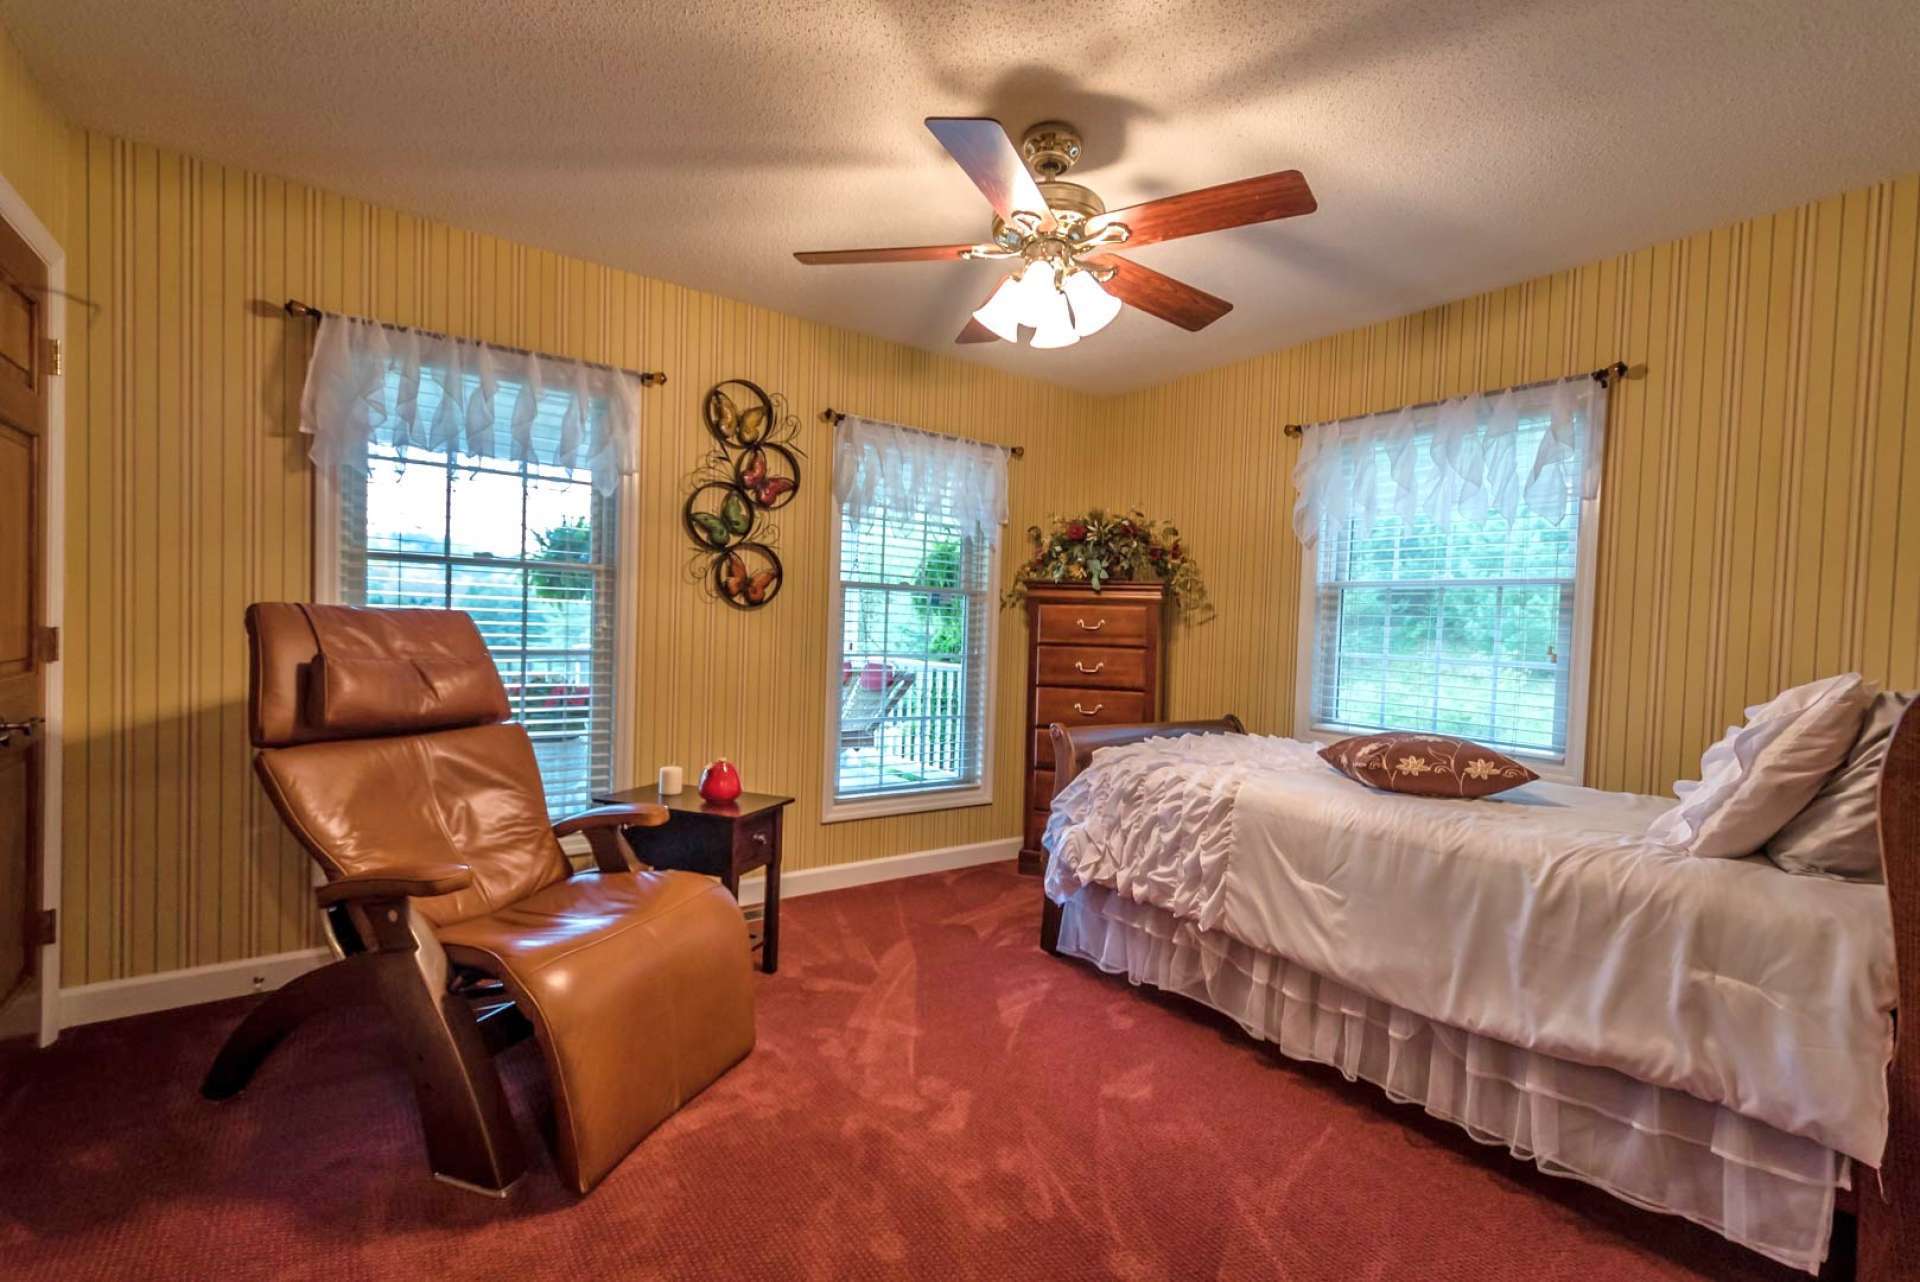 The second guest bedroom on the main level offers a carpeted floor and private bath with walk-in shower.